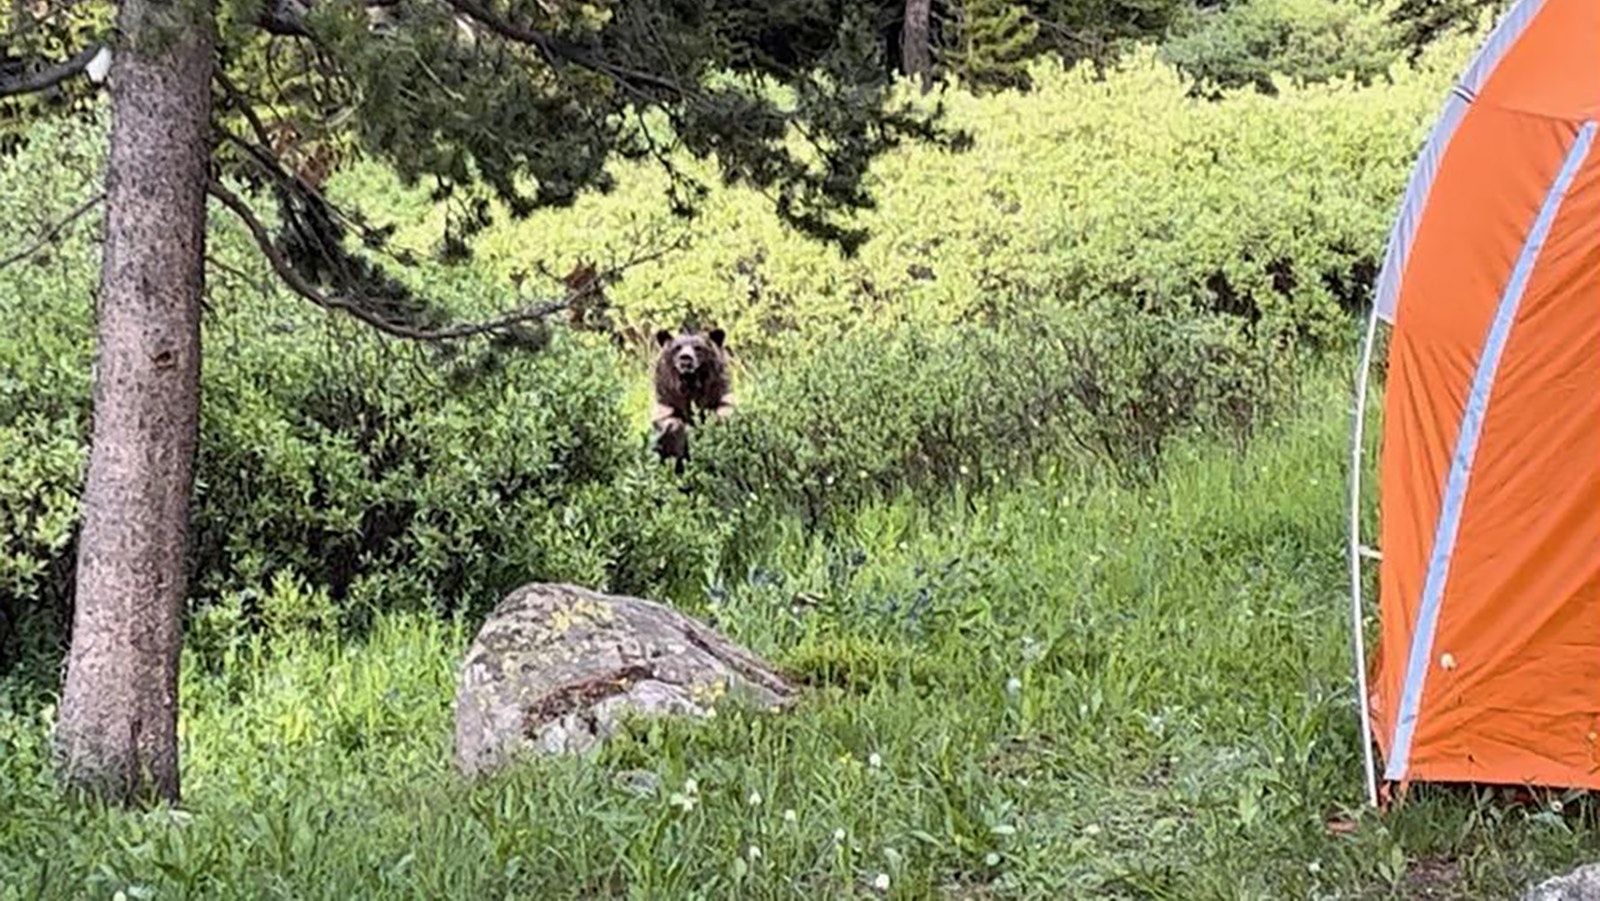 Wyoming Game and Fish agents had to kill this young grizzly bear after it repeatedly showed bold and aggressive behavior toward people along roads and in campgrounds in northwest Wyoming.